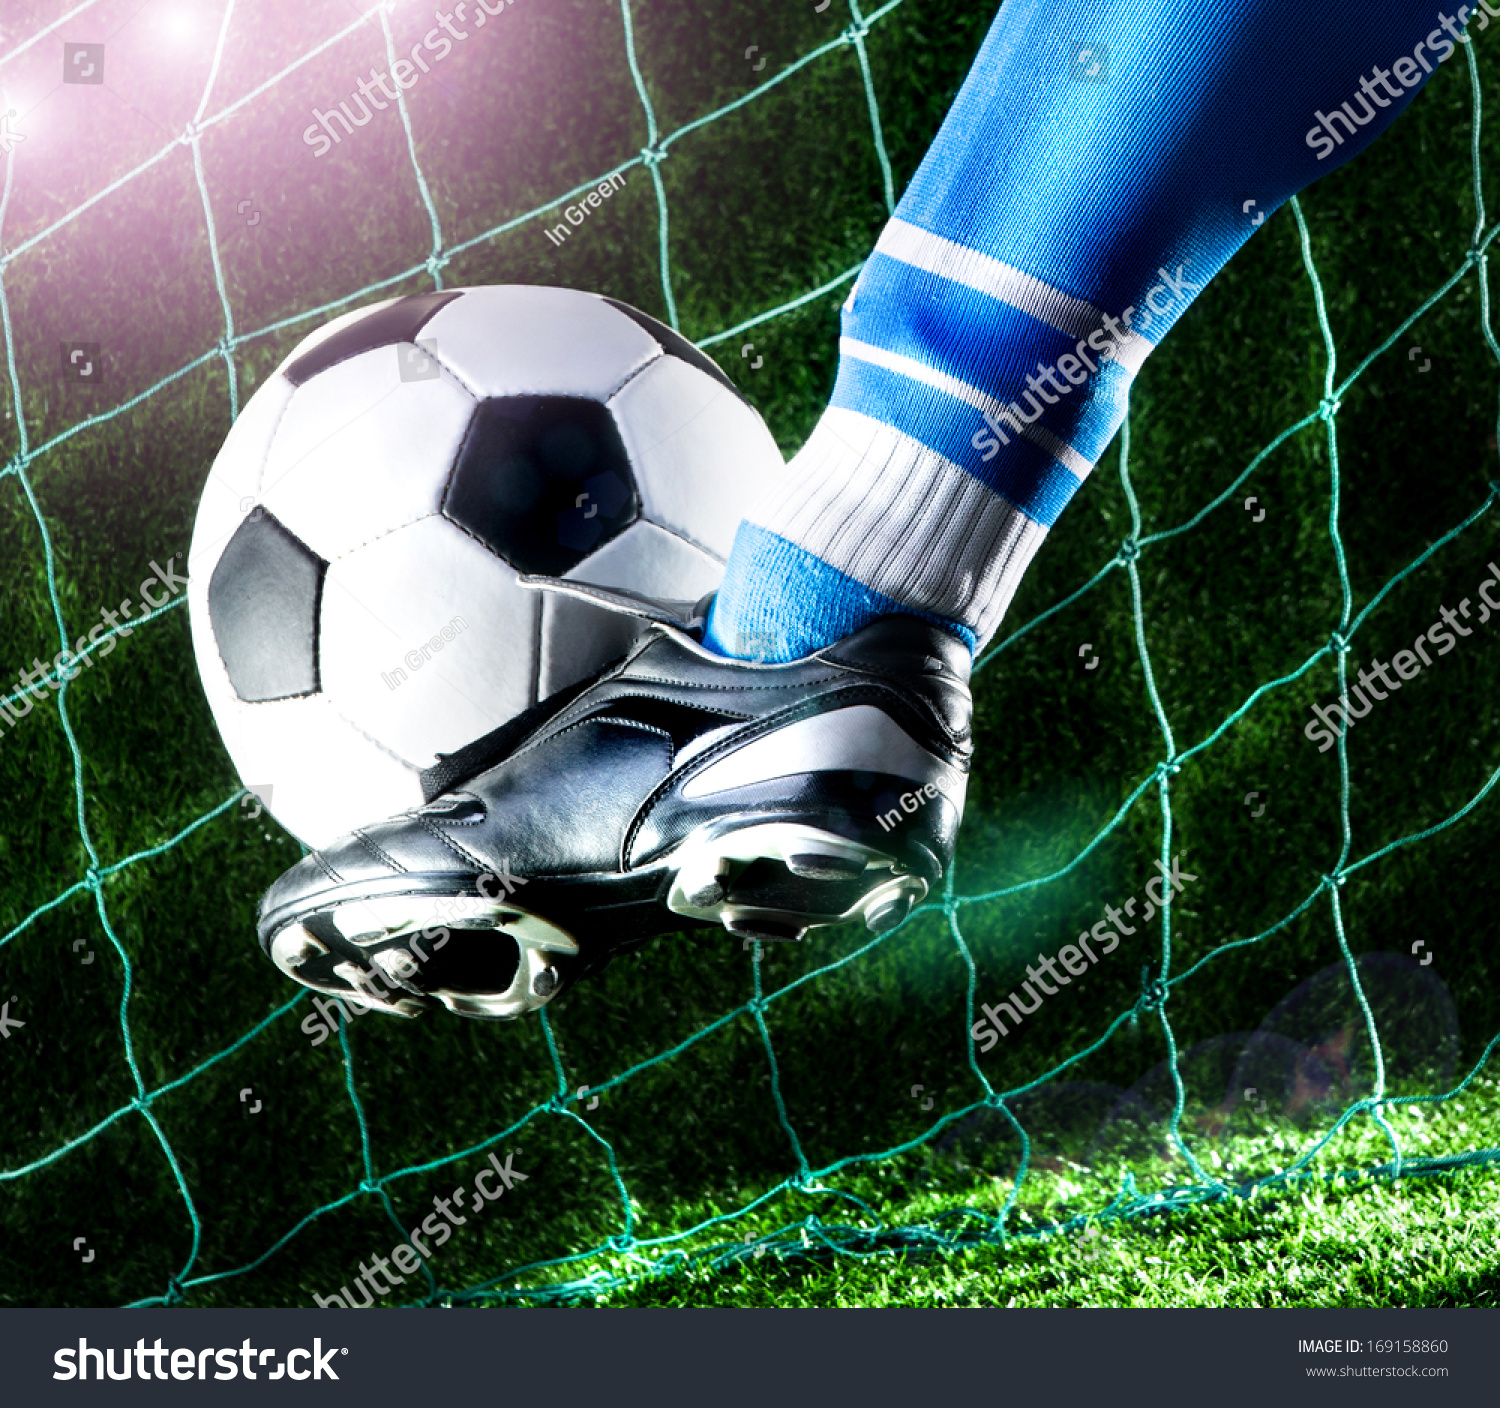 Foot Kicking Soccer Ball On Playing Field With Royalty Free Stock Photo Avopix Com